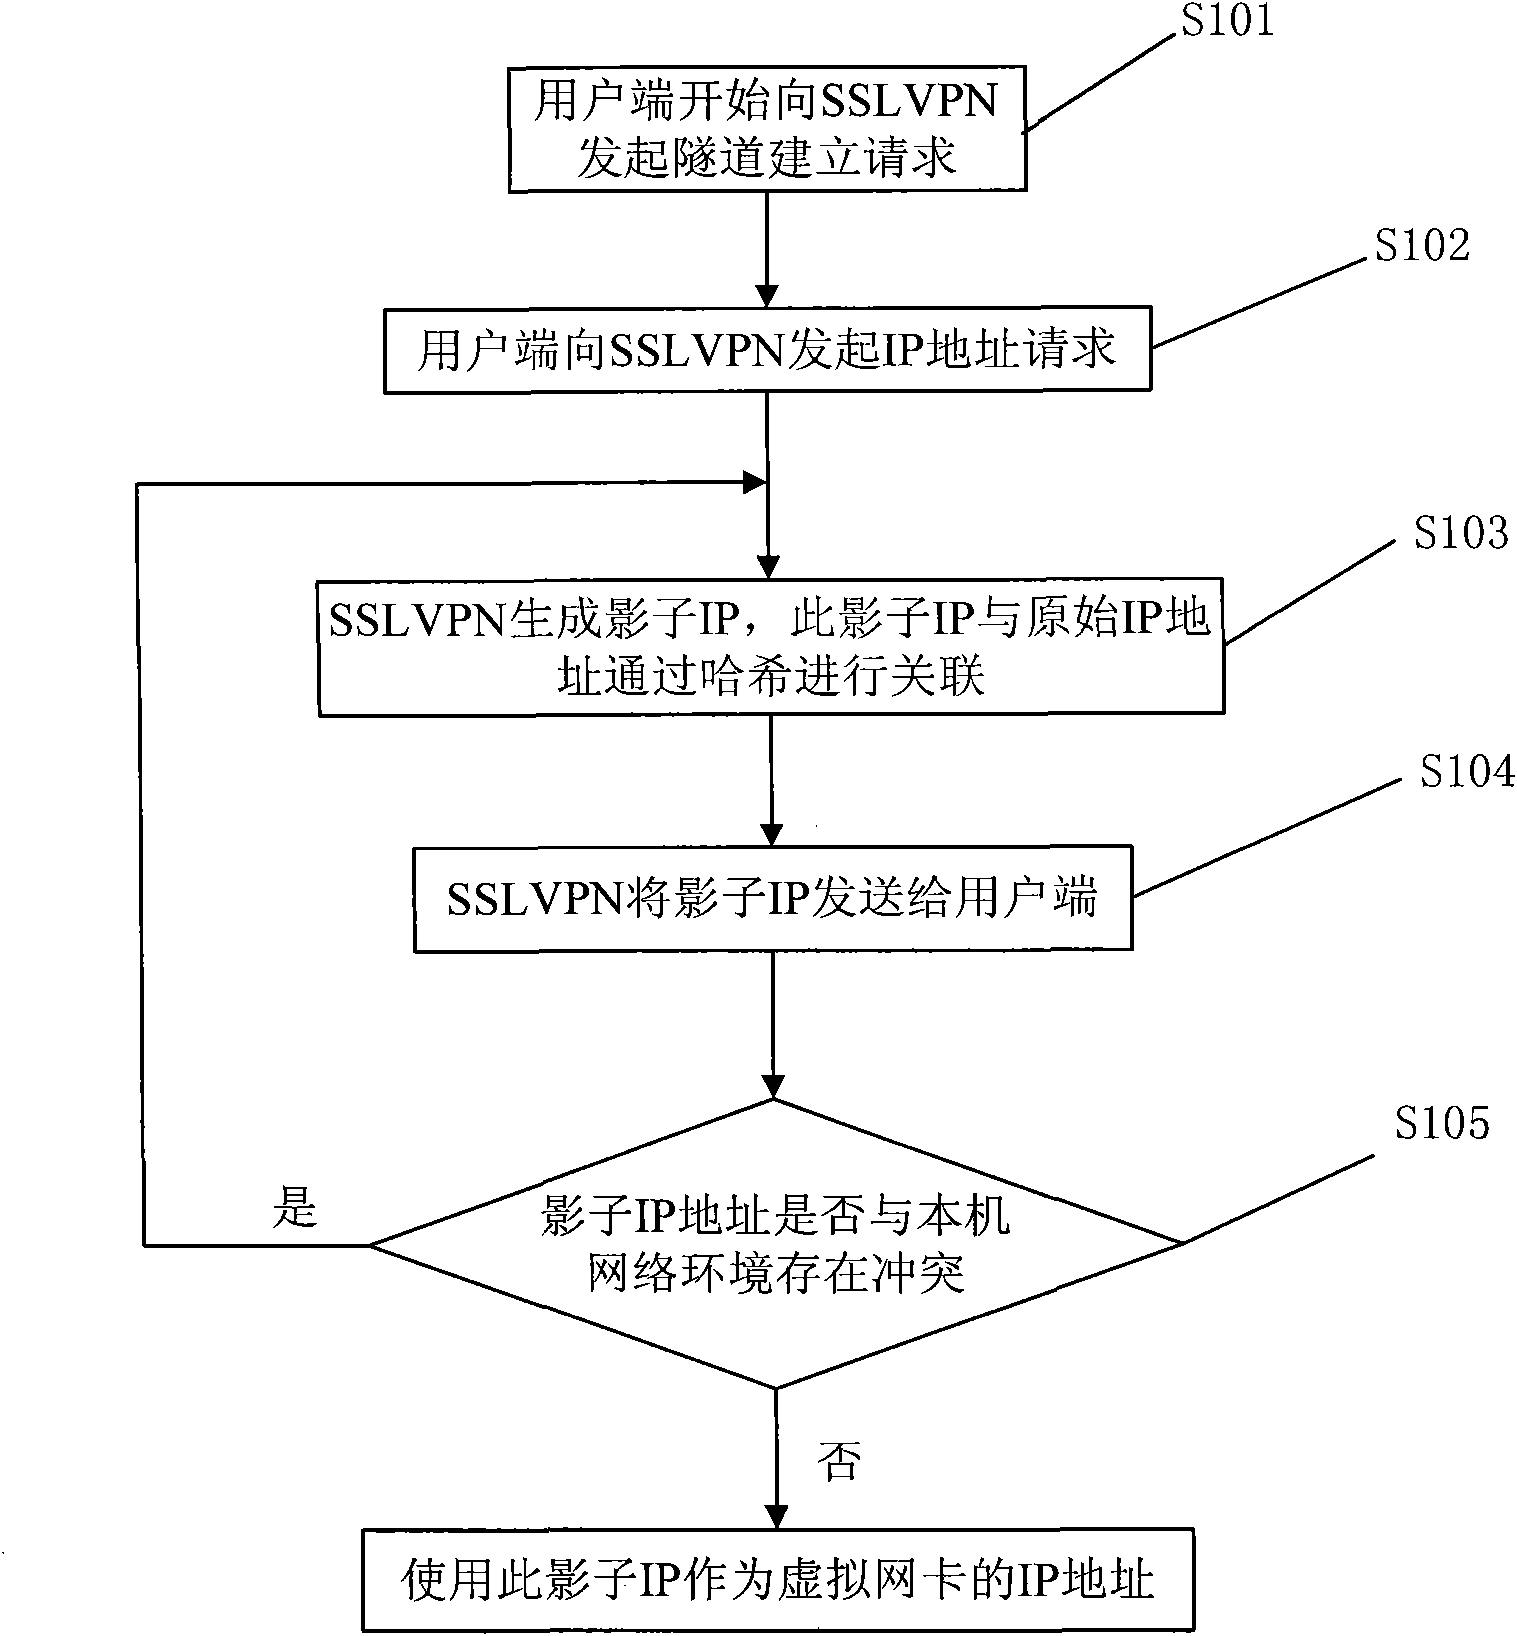 Solution method of address conflict in point-to-network tunnel mode